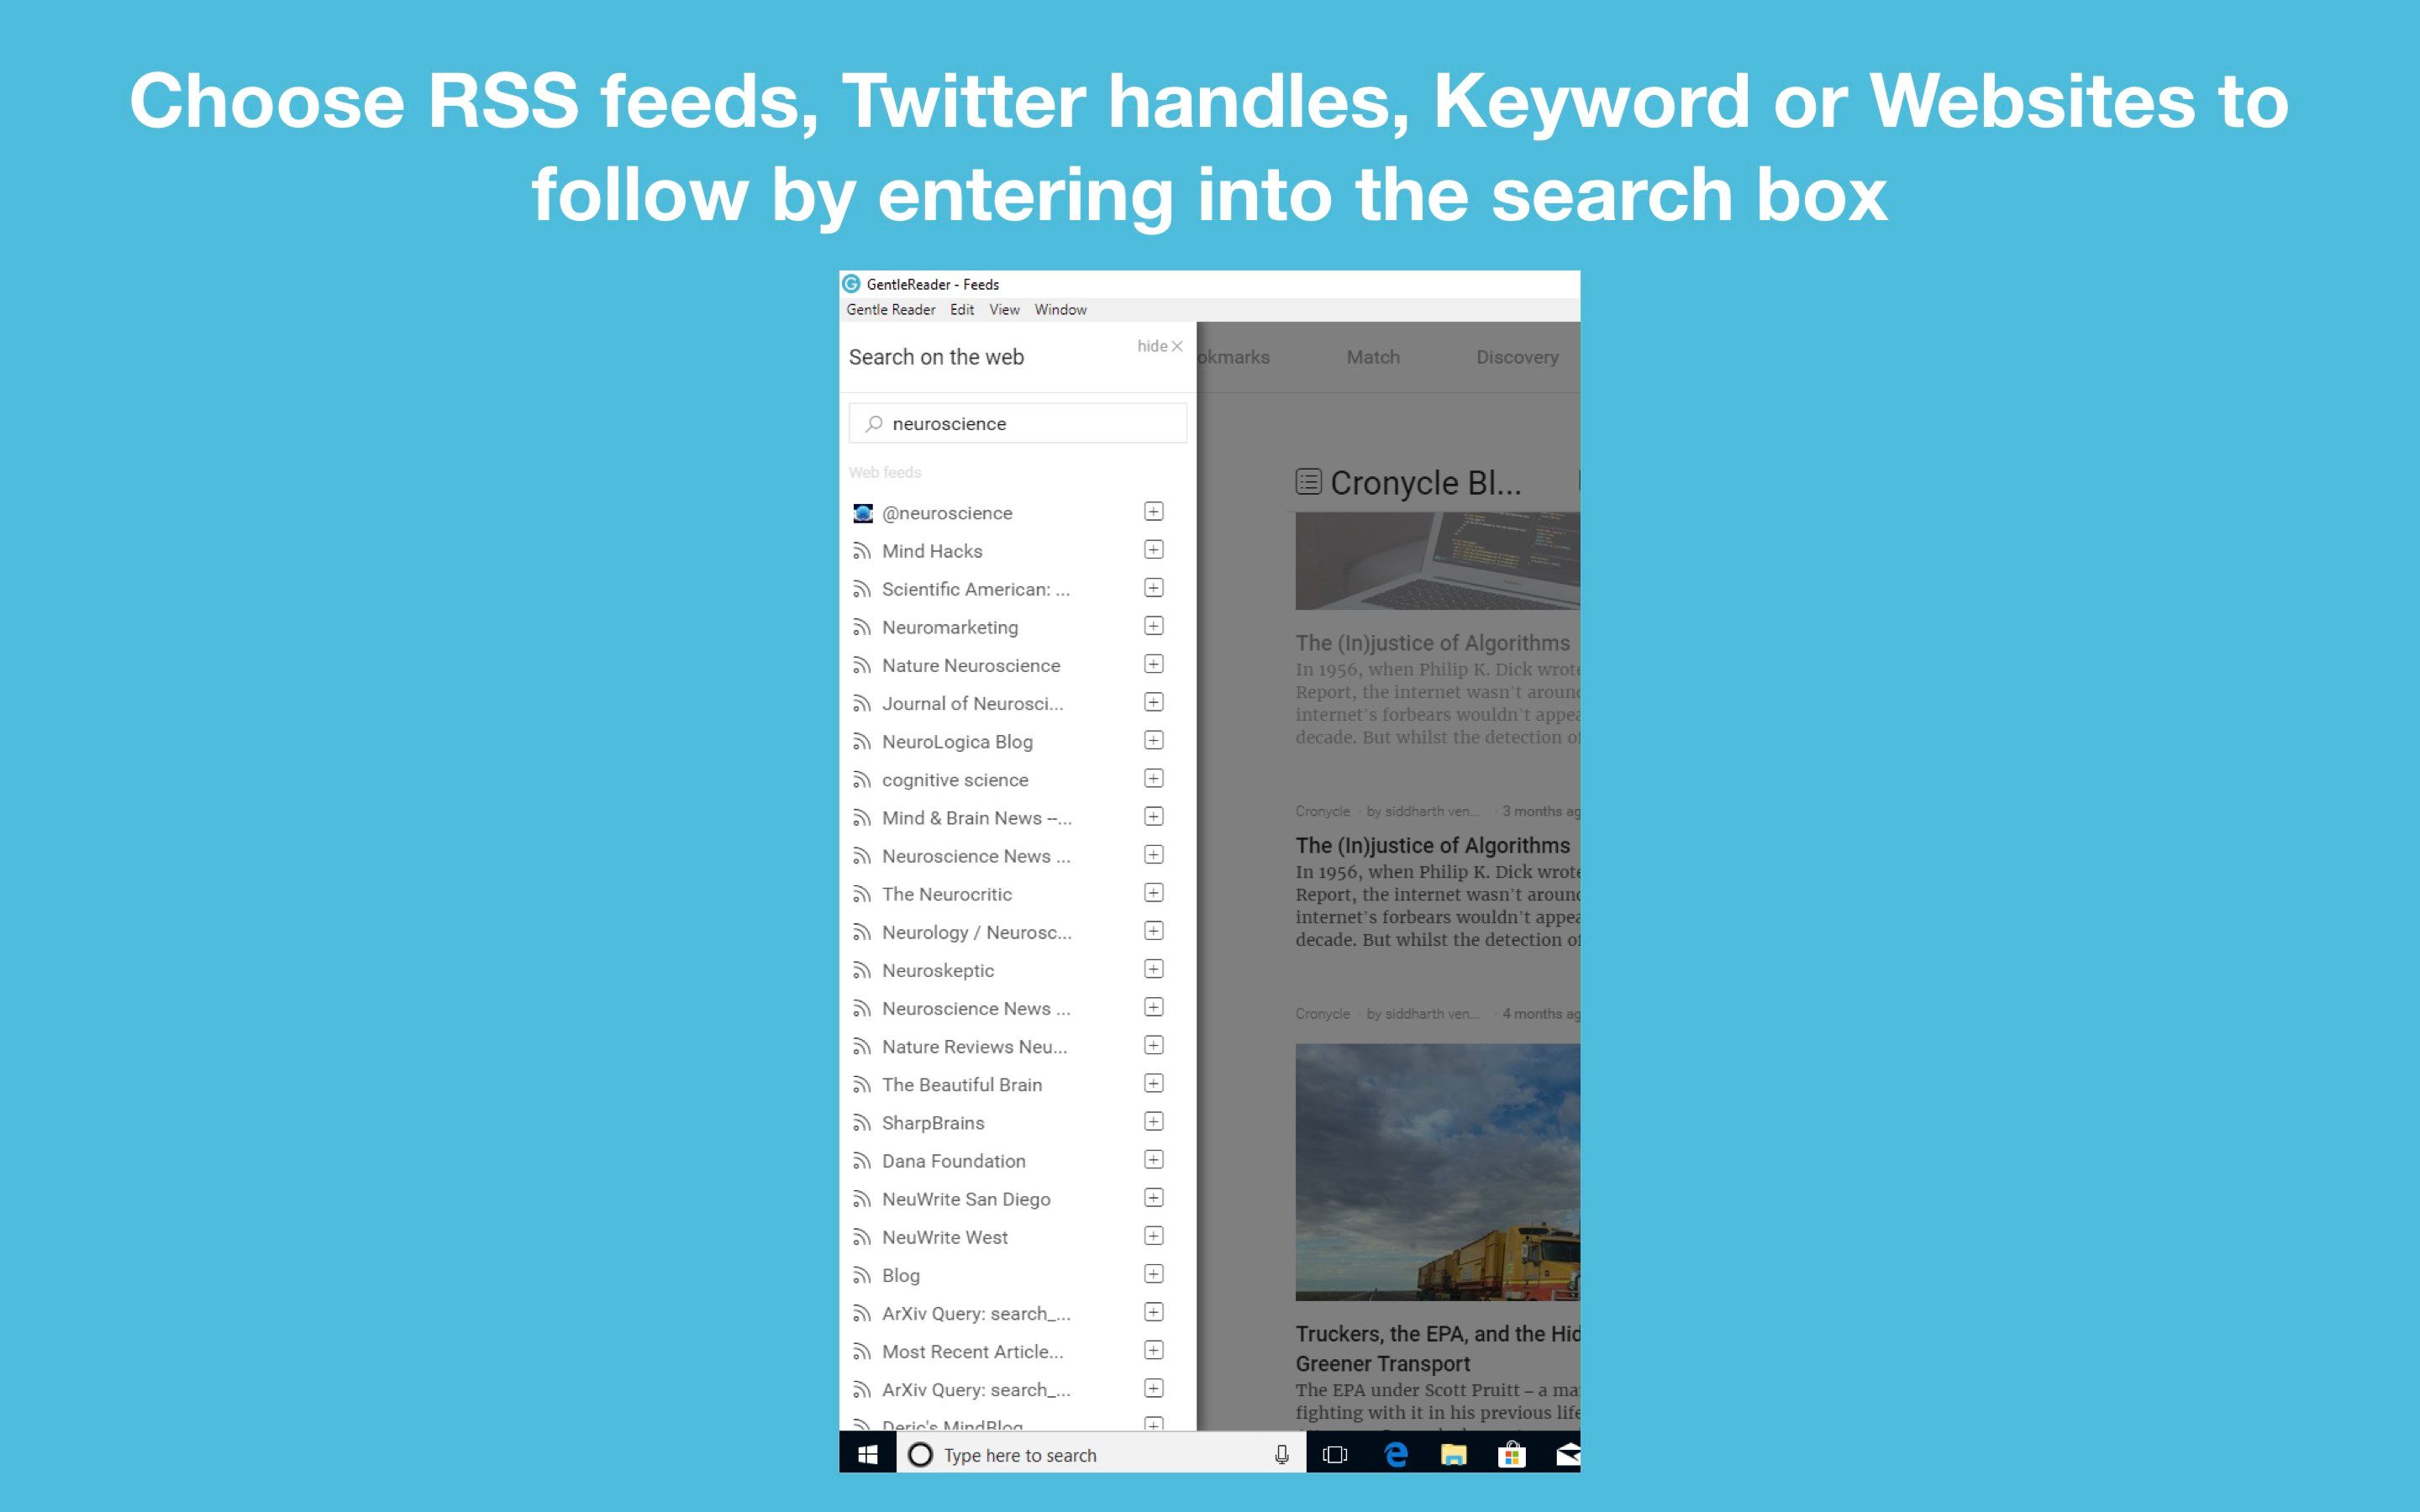 Choose RSS feeds, Twitter handles, Keyword or Websites to follow by entering into the search box